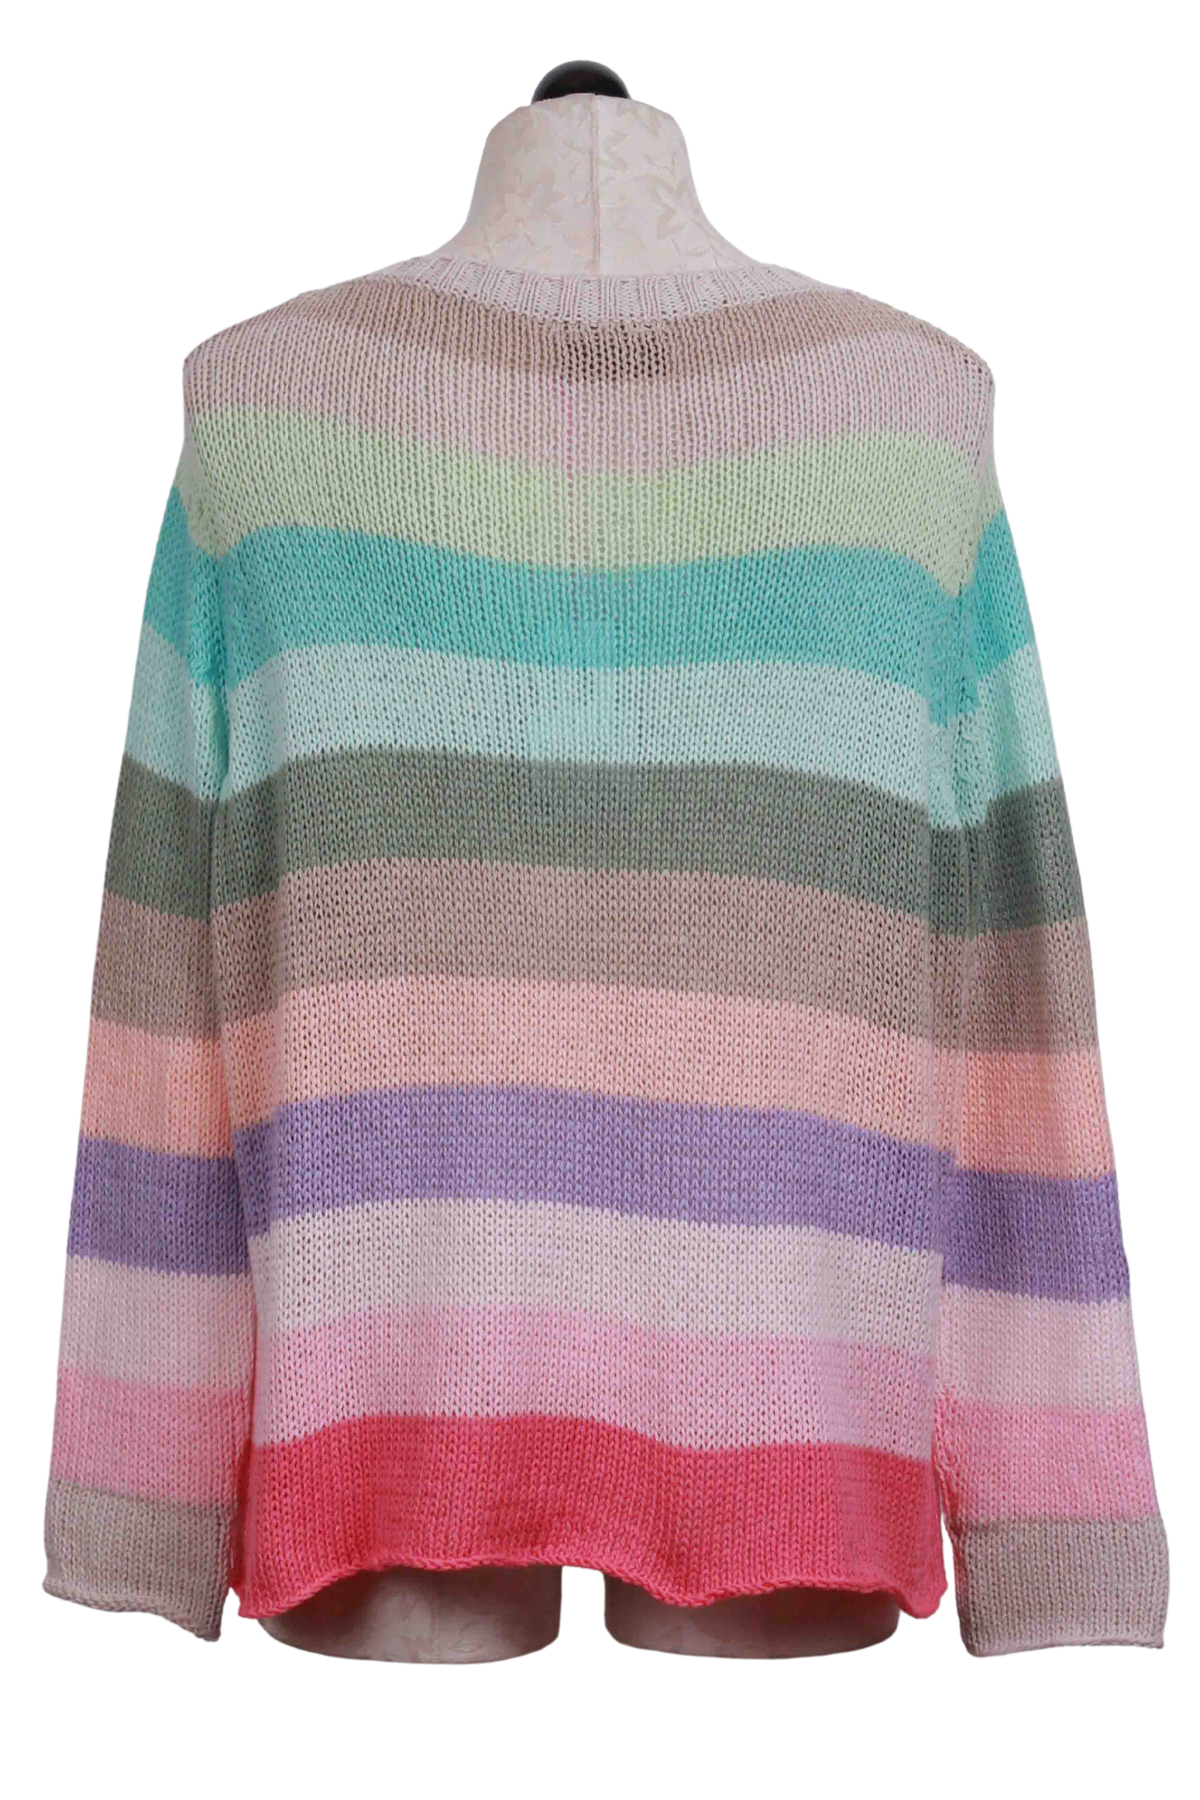 back view of Cherry Pastille Stripe Flower Market Crew Sweater by Wooden Ships